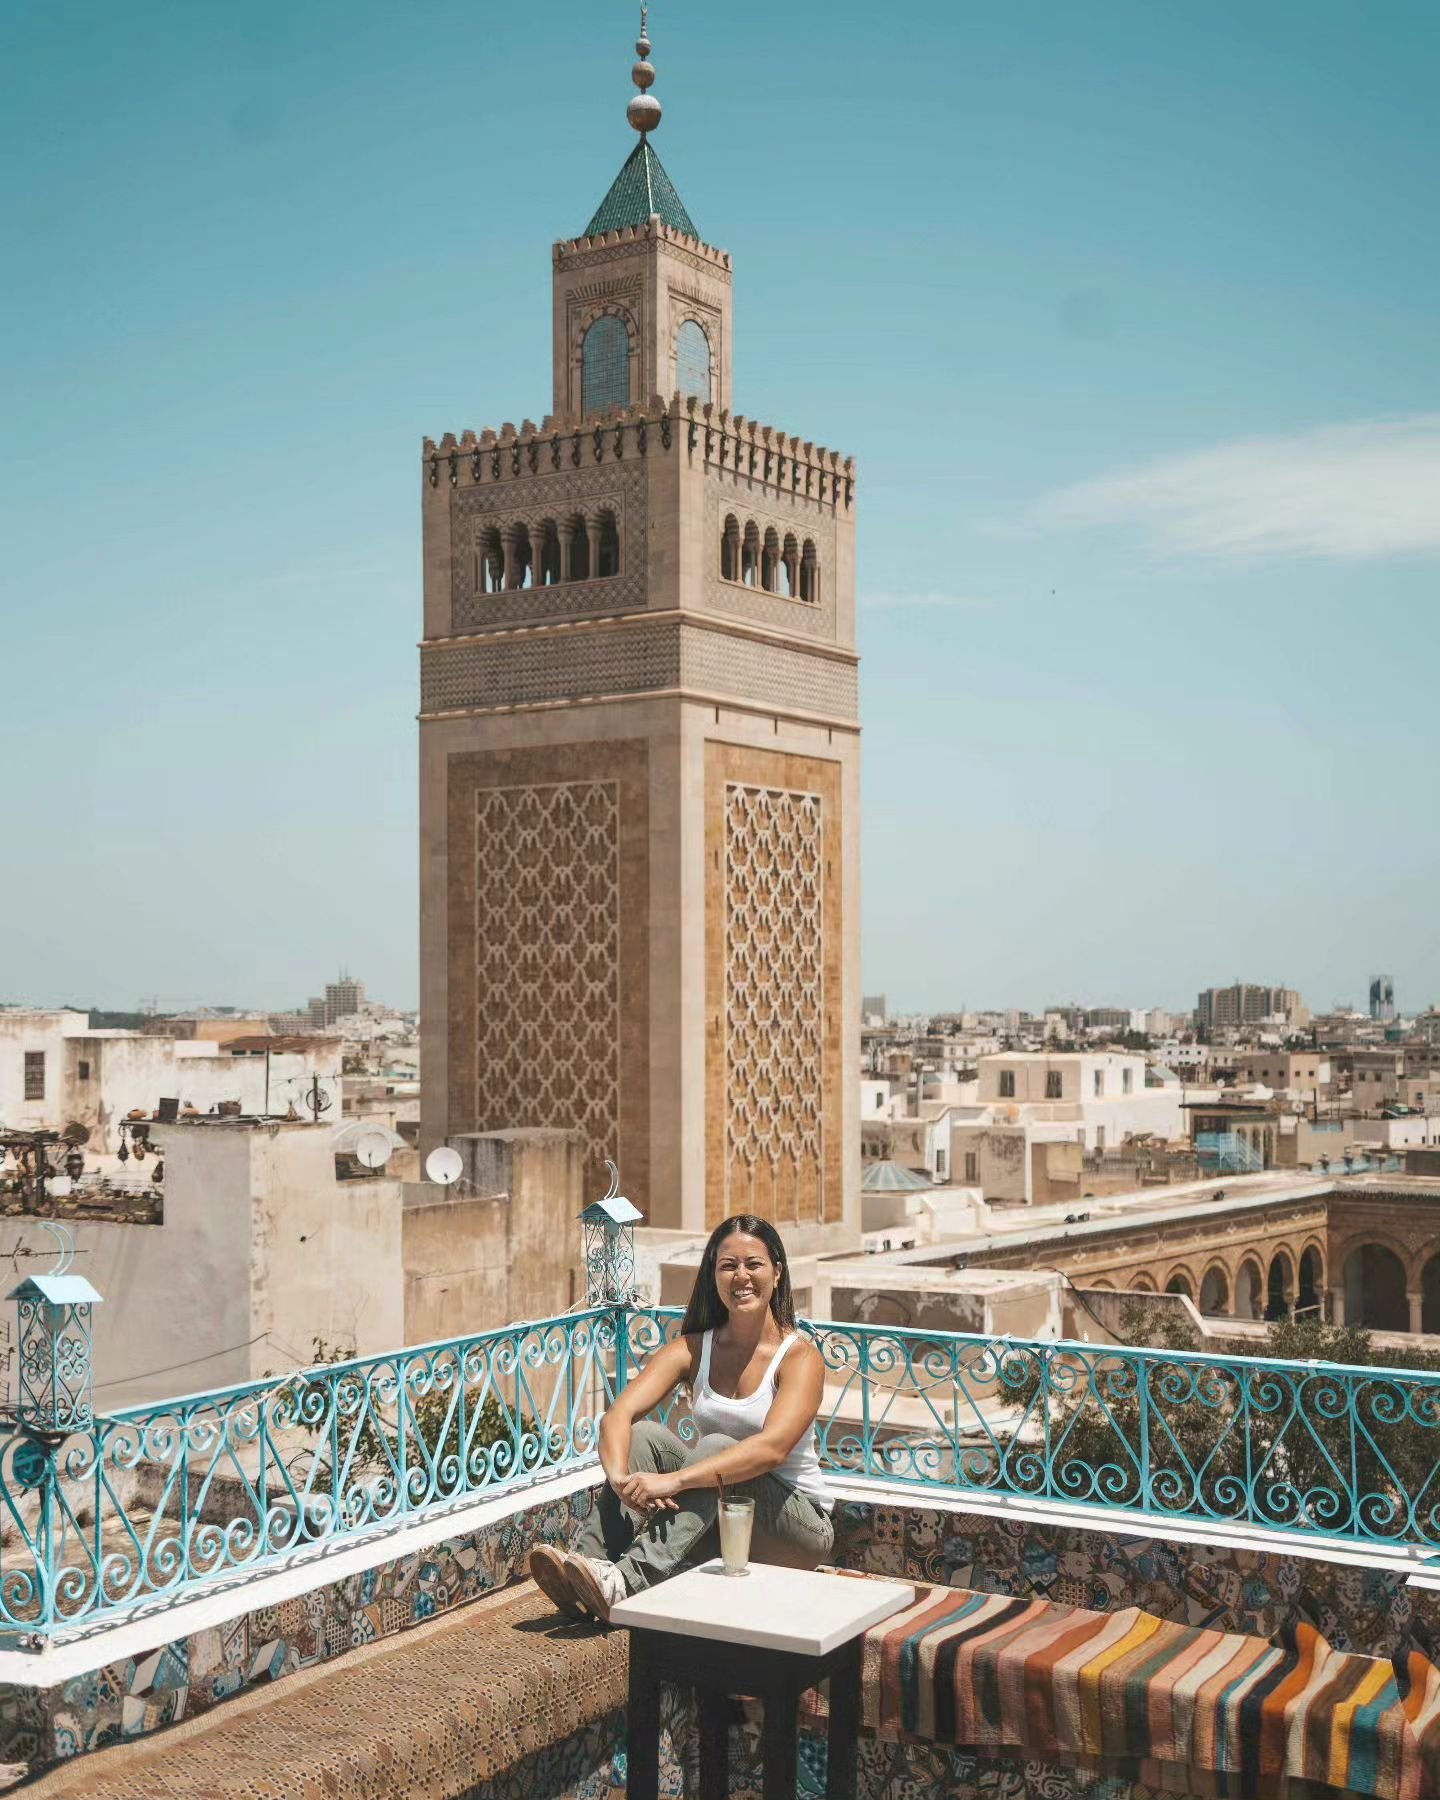 Back in Tunisia! 🇹🇳 Staying around Tunis for a few days to relax, do laundry, and catch up on work before heading to my next two countries ✨️

My favorite view in Tunis ✨️ SAVE ✨️ for the exact location! This rooftop cafe is located in the Medina, 